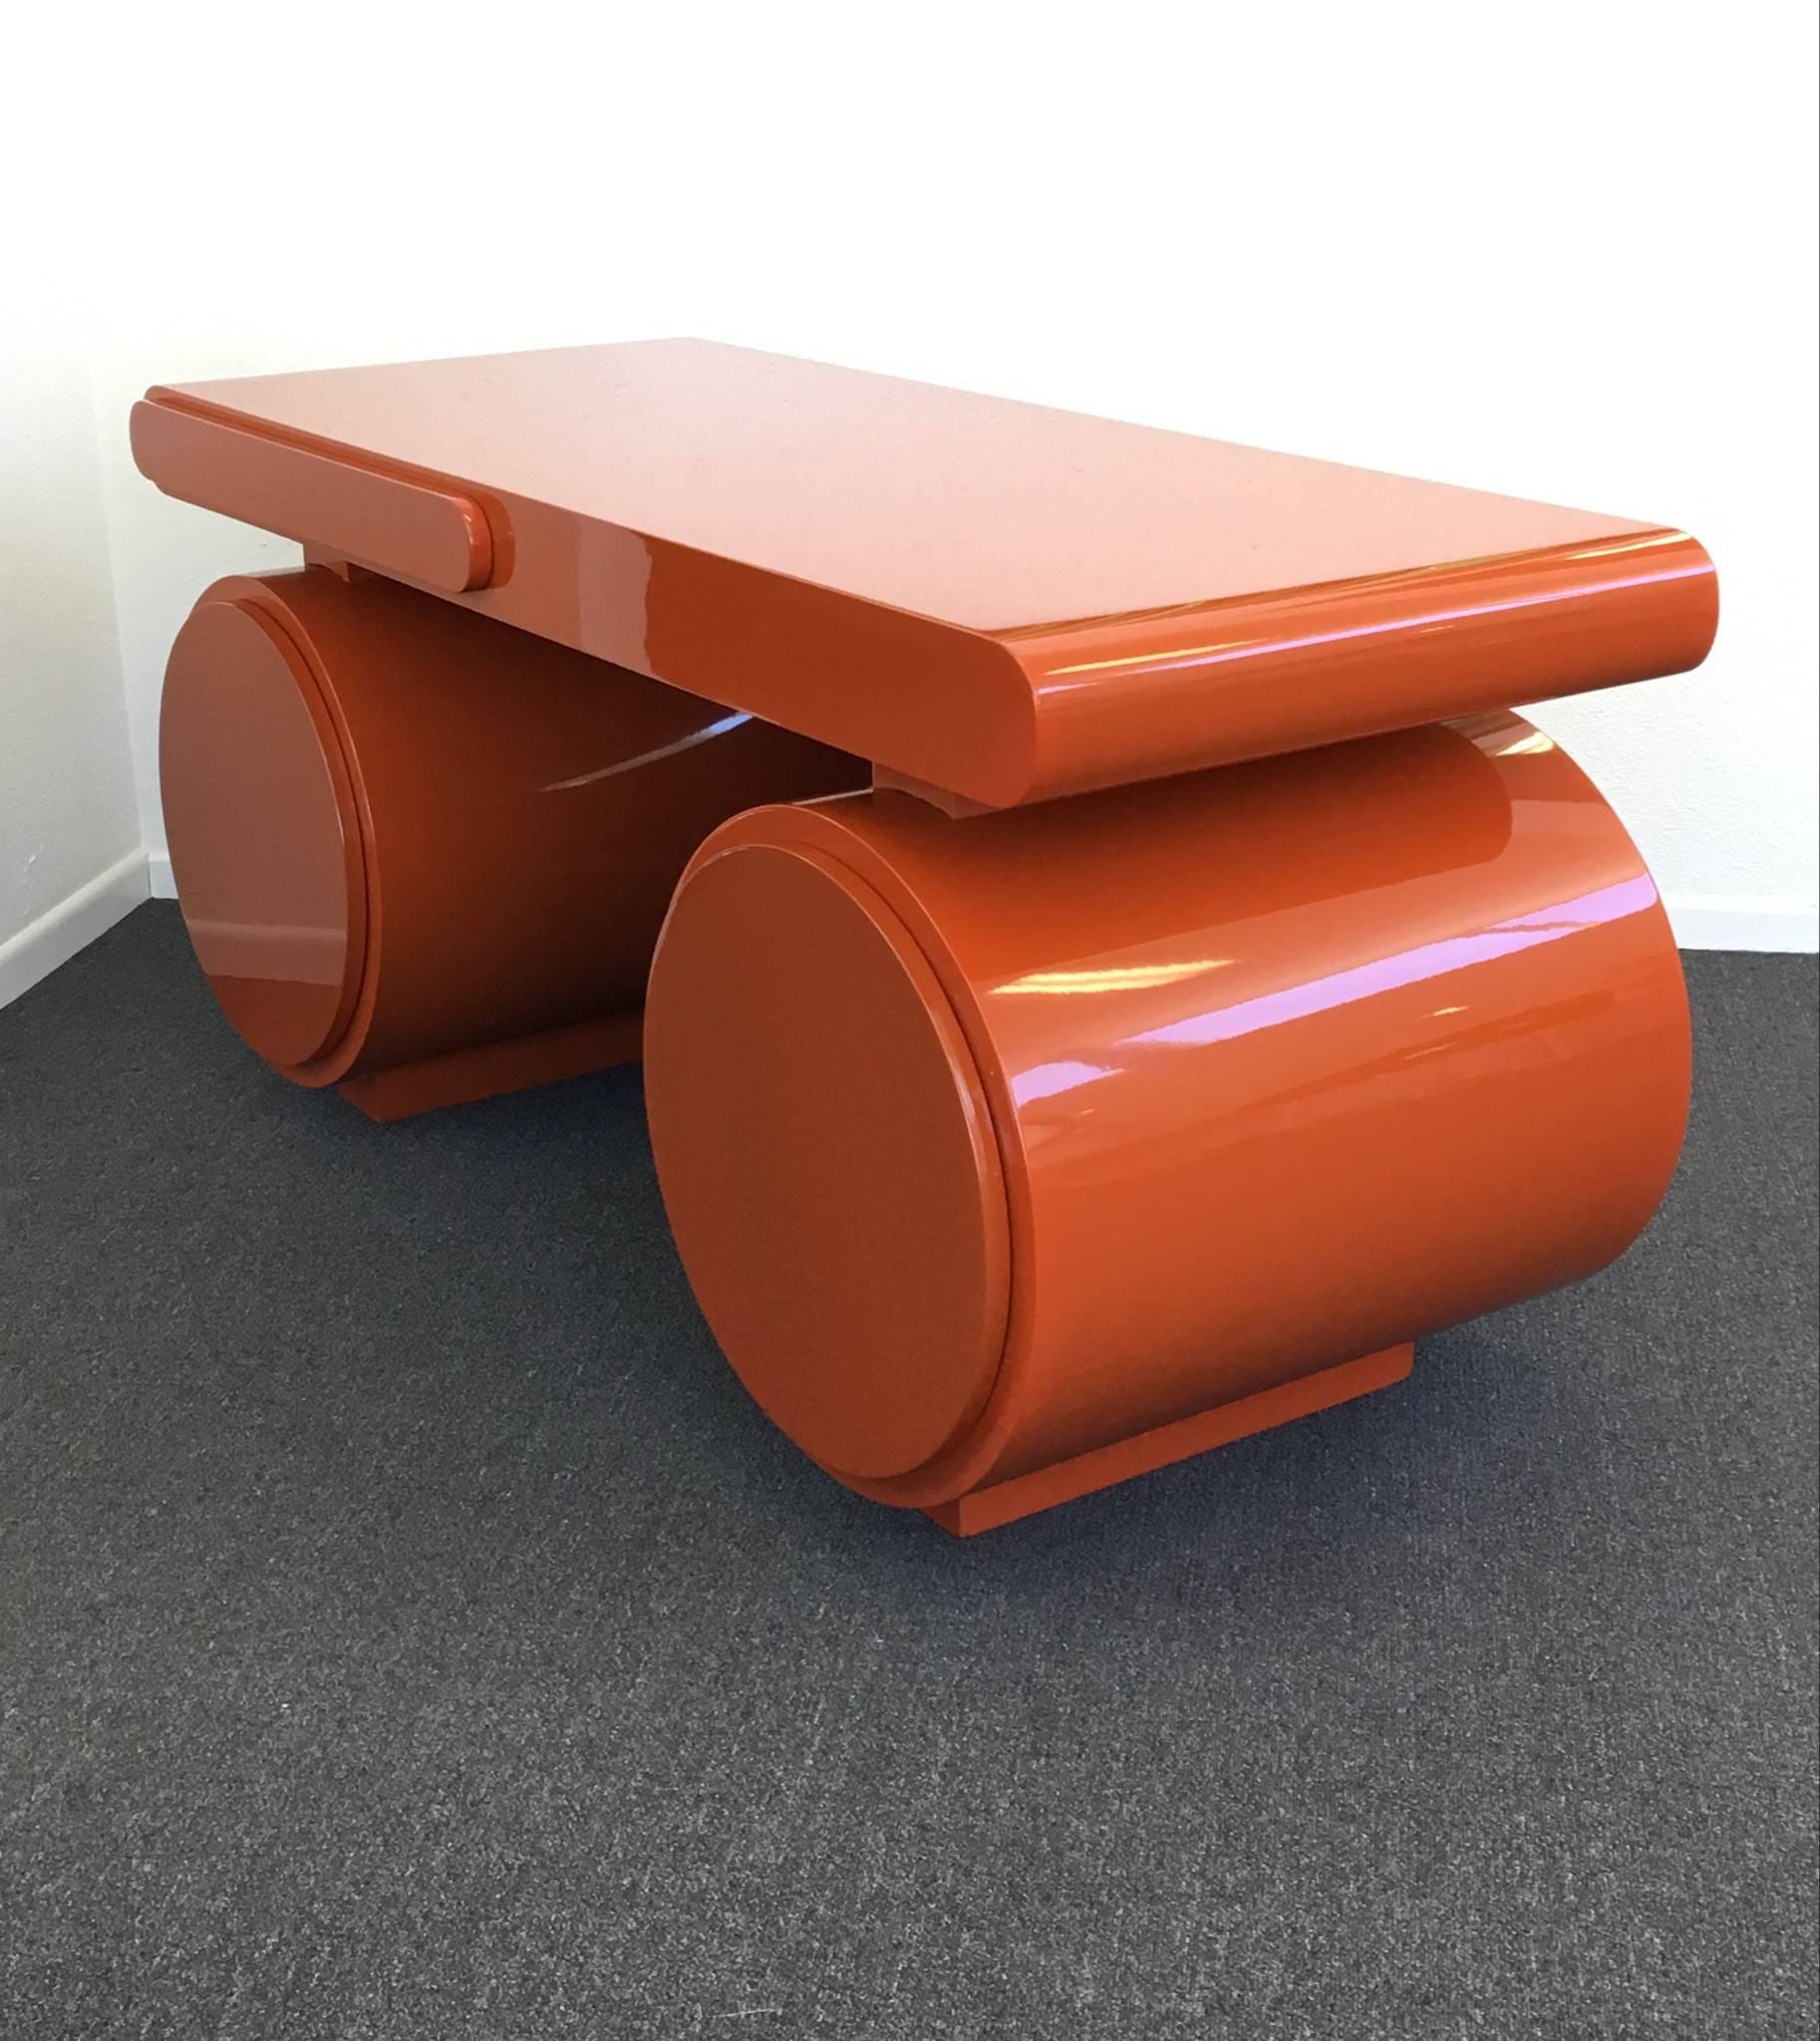 A spectacular 1960s scuptural desk with a orange high gloss lacquered finished. The desk has three drawers. One small of center top drawer and the two round bottom drawers are file size. 

DIM: 28.5